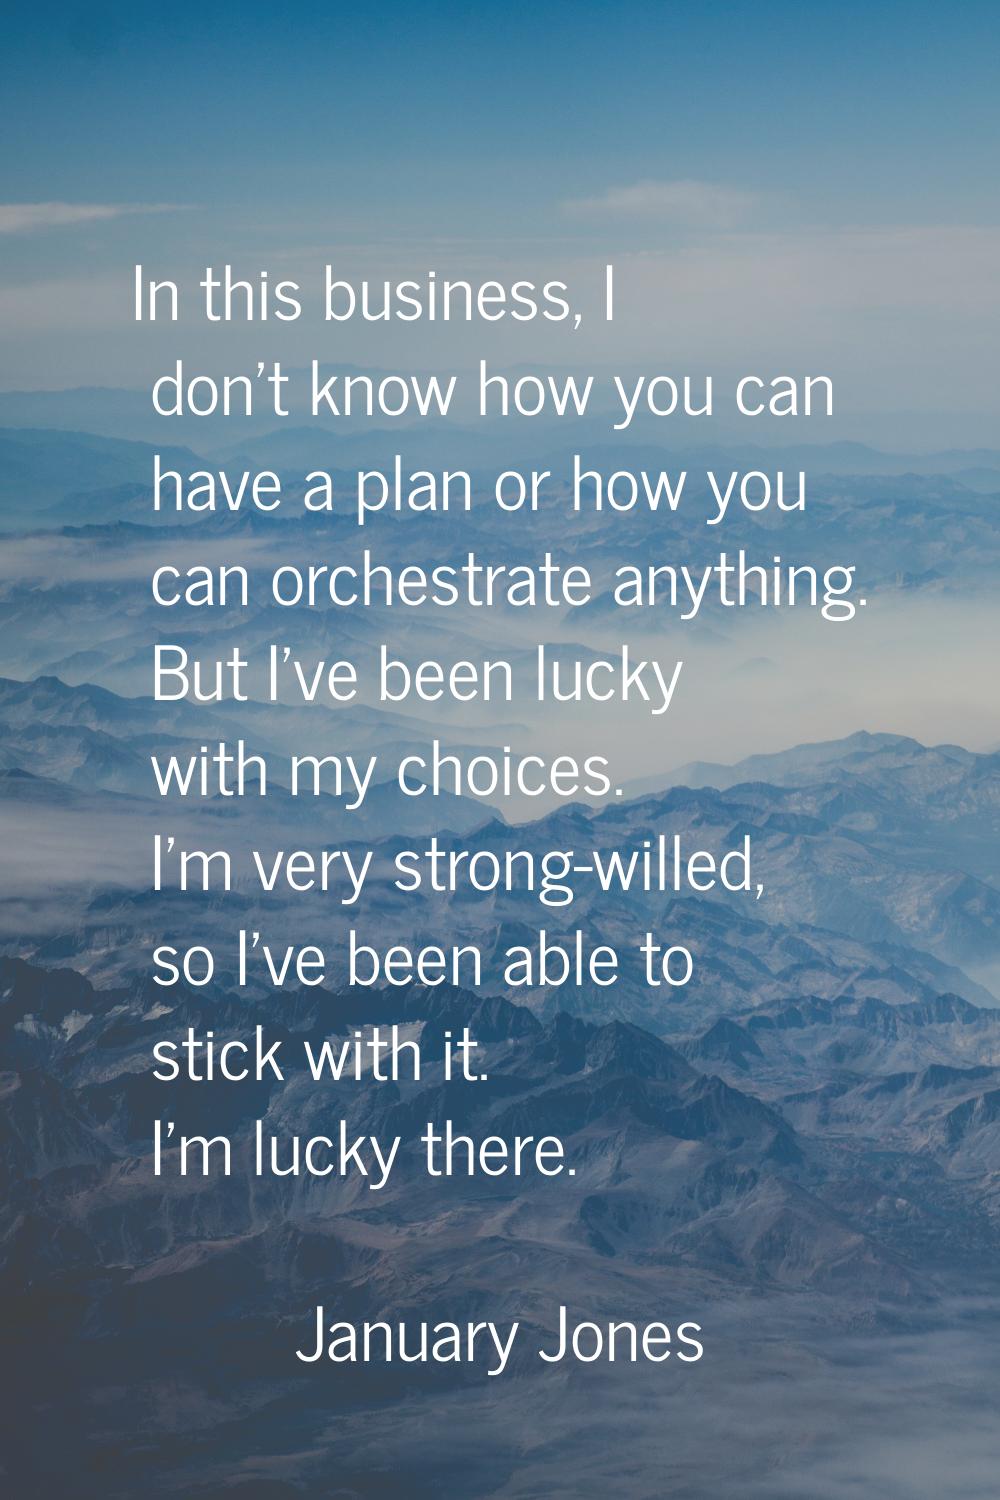 In this business, I don't know how you can have a plan or how you can orchestrate anything. But I'v